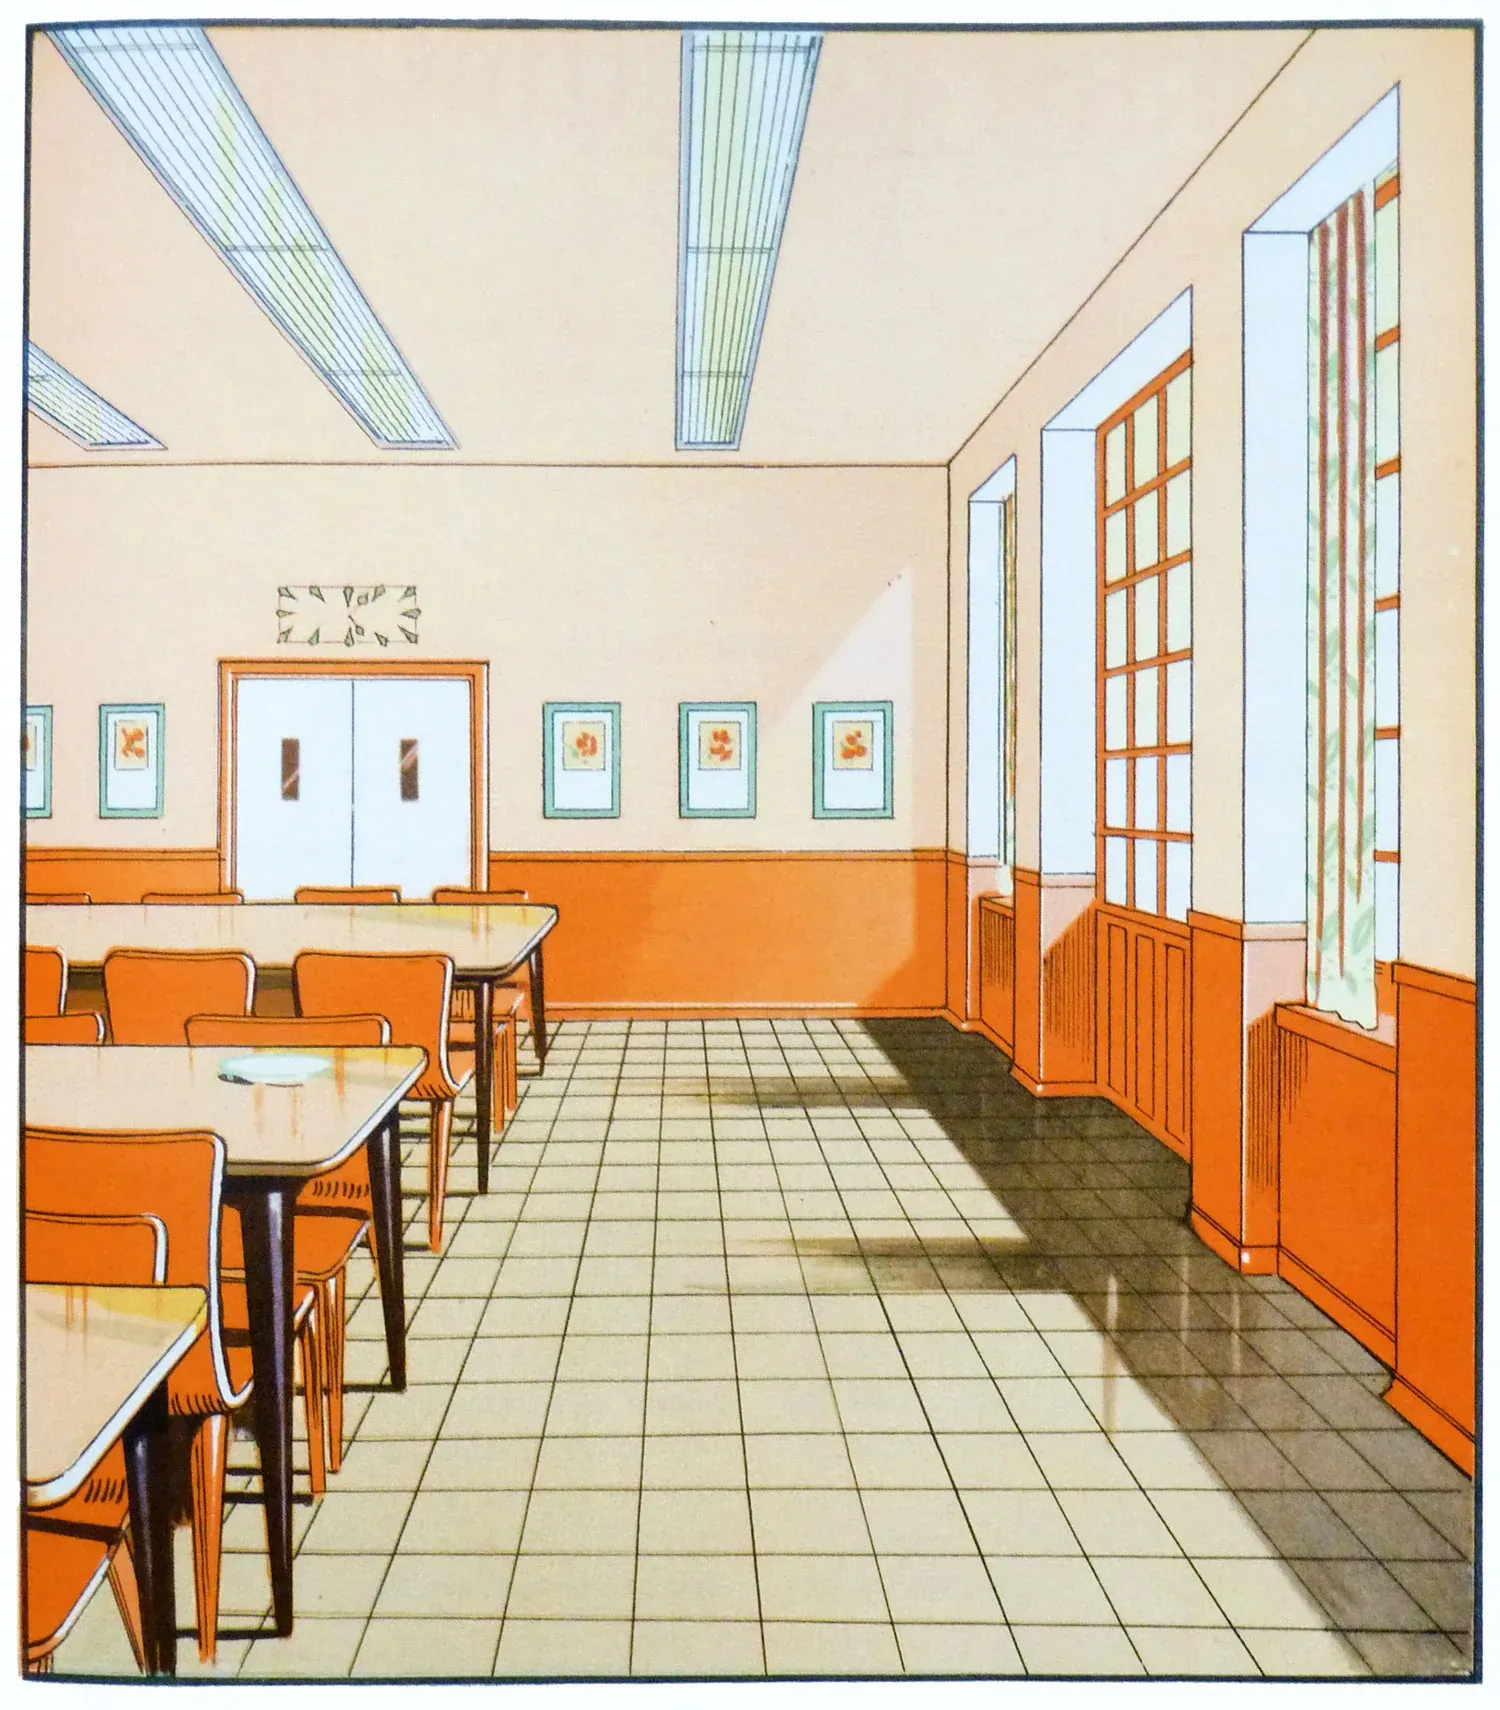 The Power of Colour in 1930s Schools and Hospitals